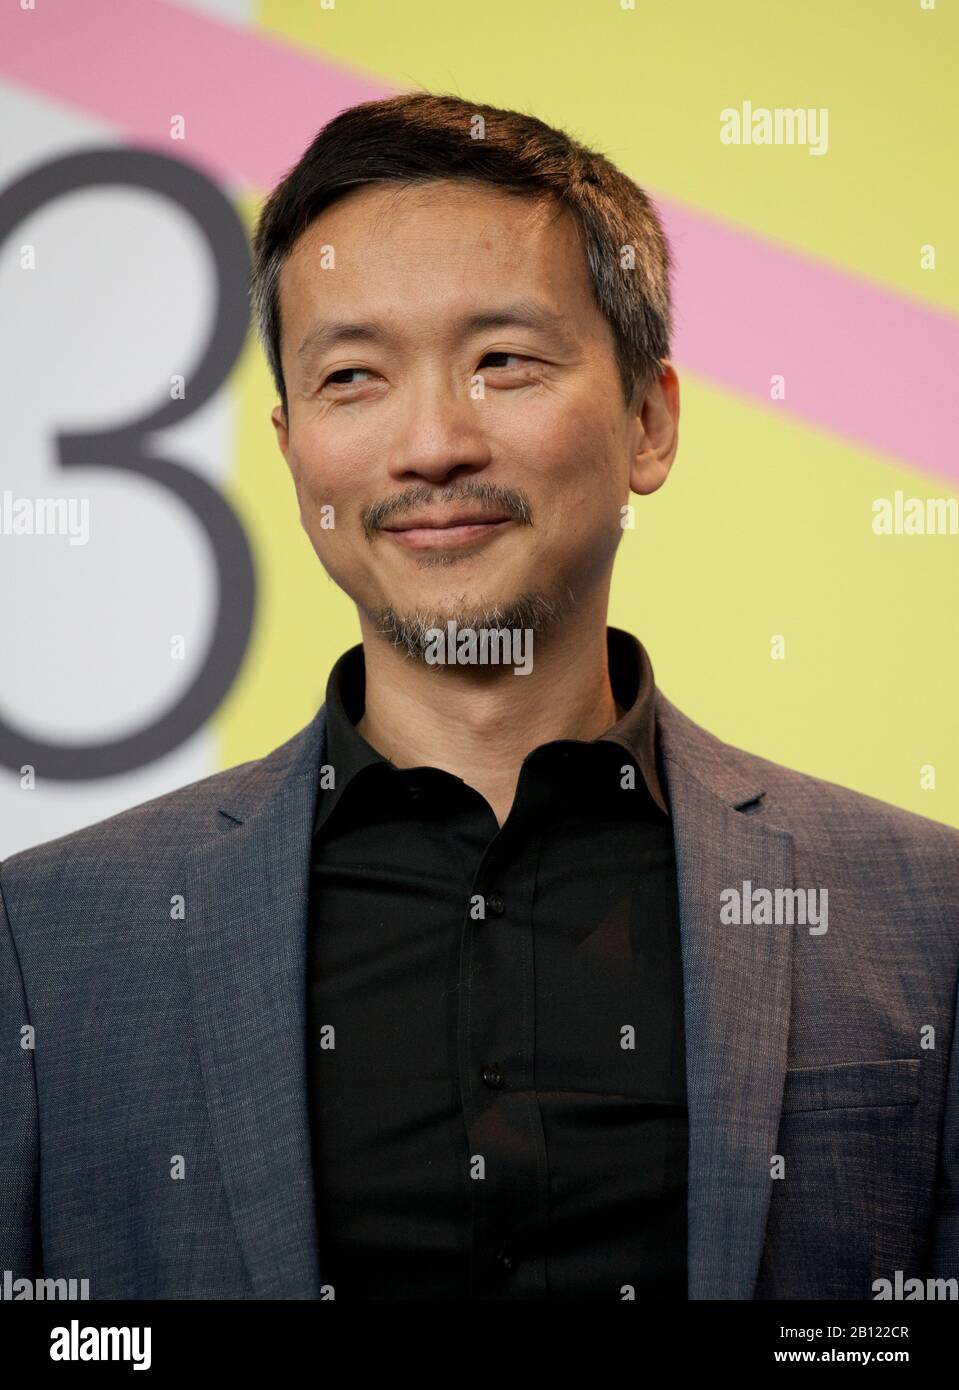 Actor Orion Lee at the press conference for the film First Cow at the 70th Berlinale International Film Festival, on Saturday 22nd February 2020, Hotel Grand Hyatt, Berlin, Germany. Photo credit: Doreen Kennedy Stock Photo